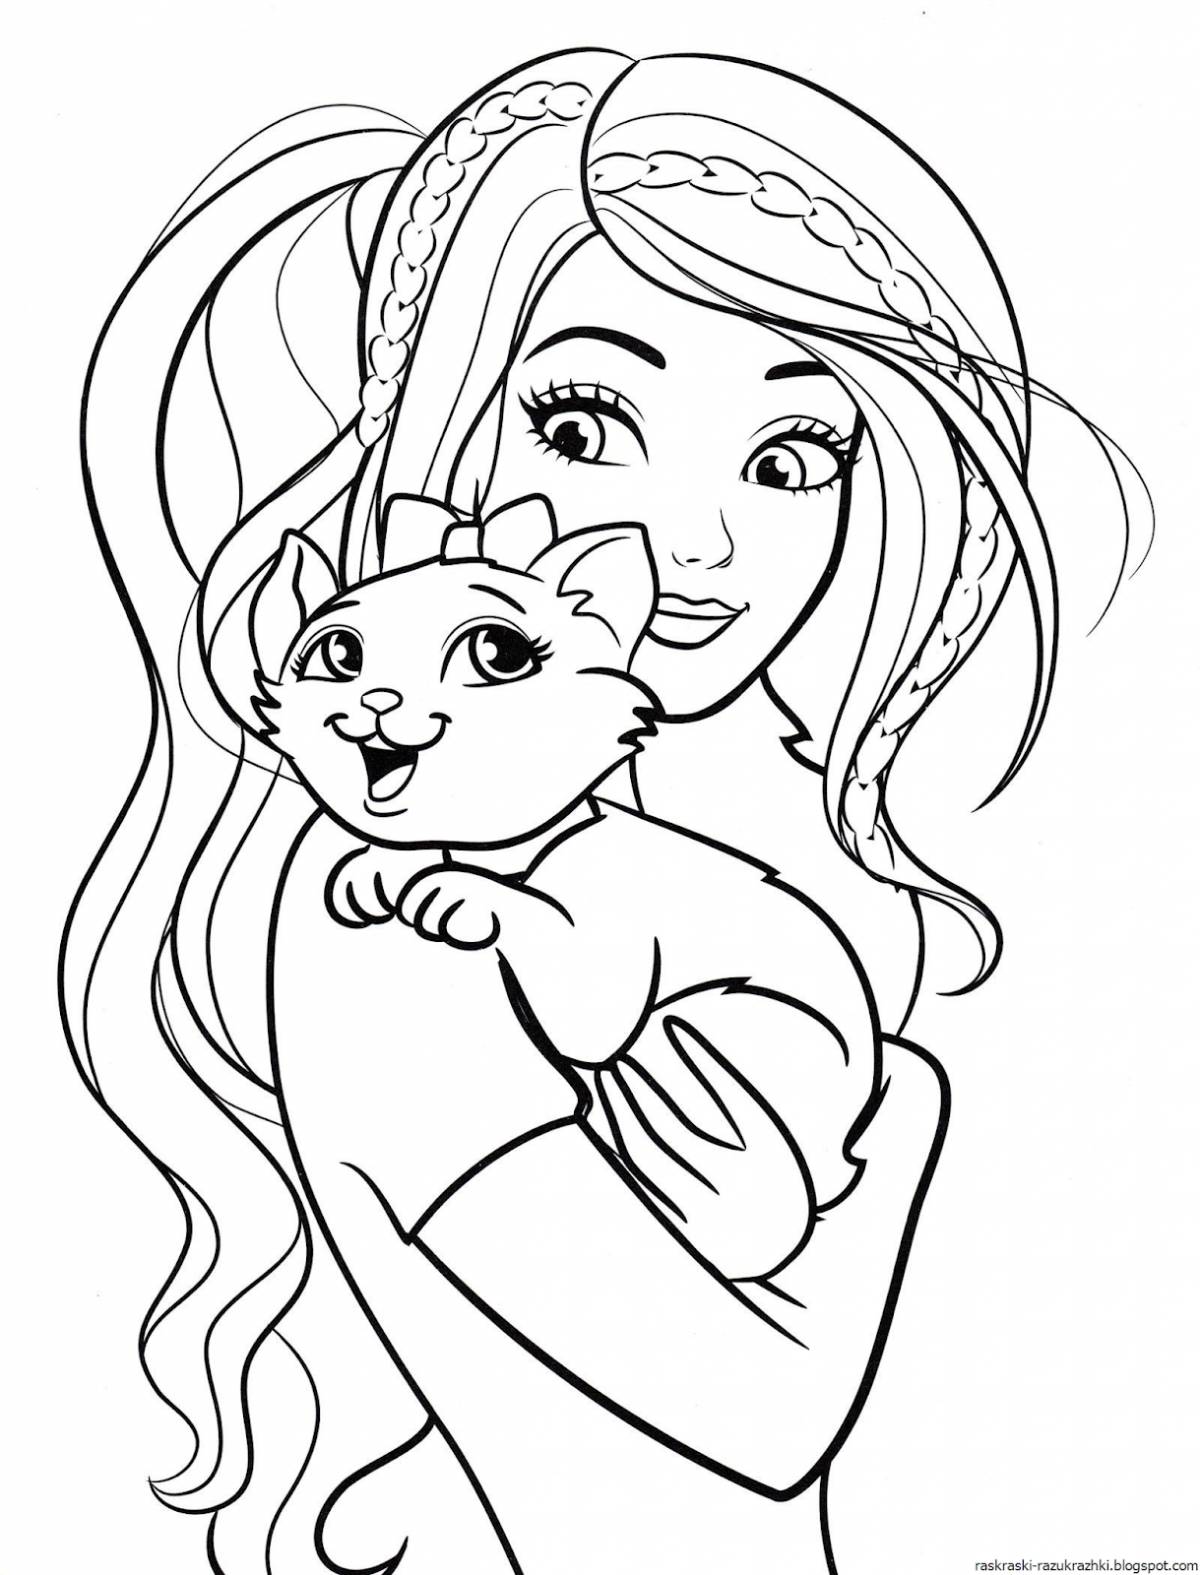 Barbie coloring book for kids